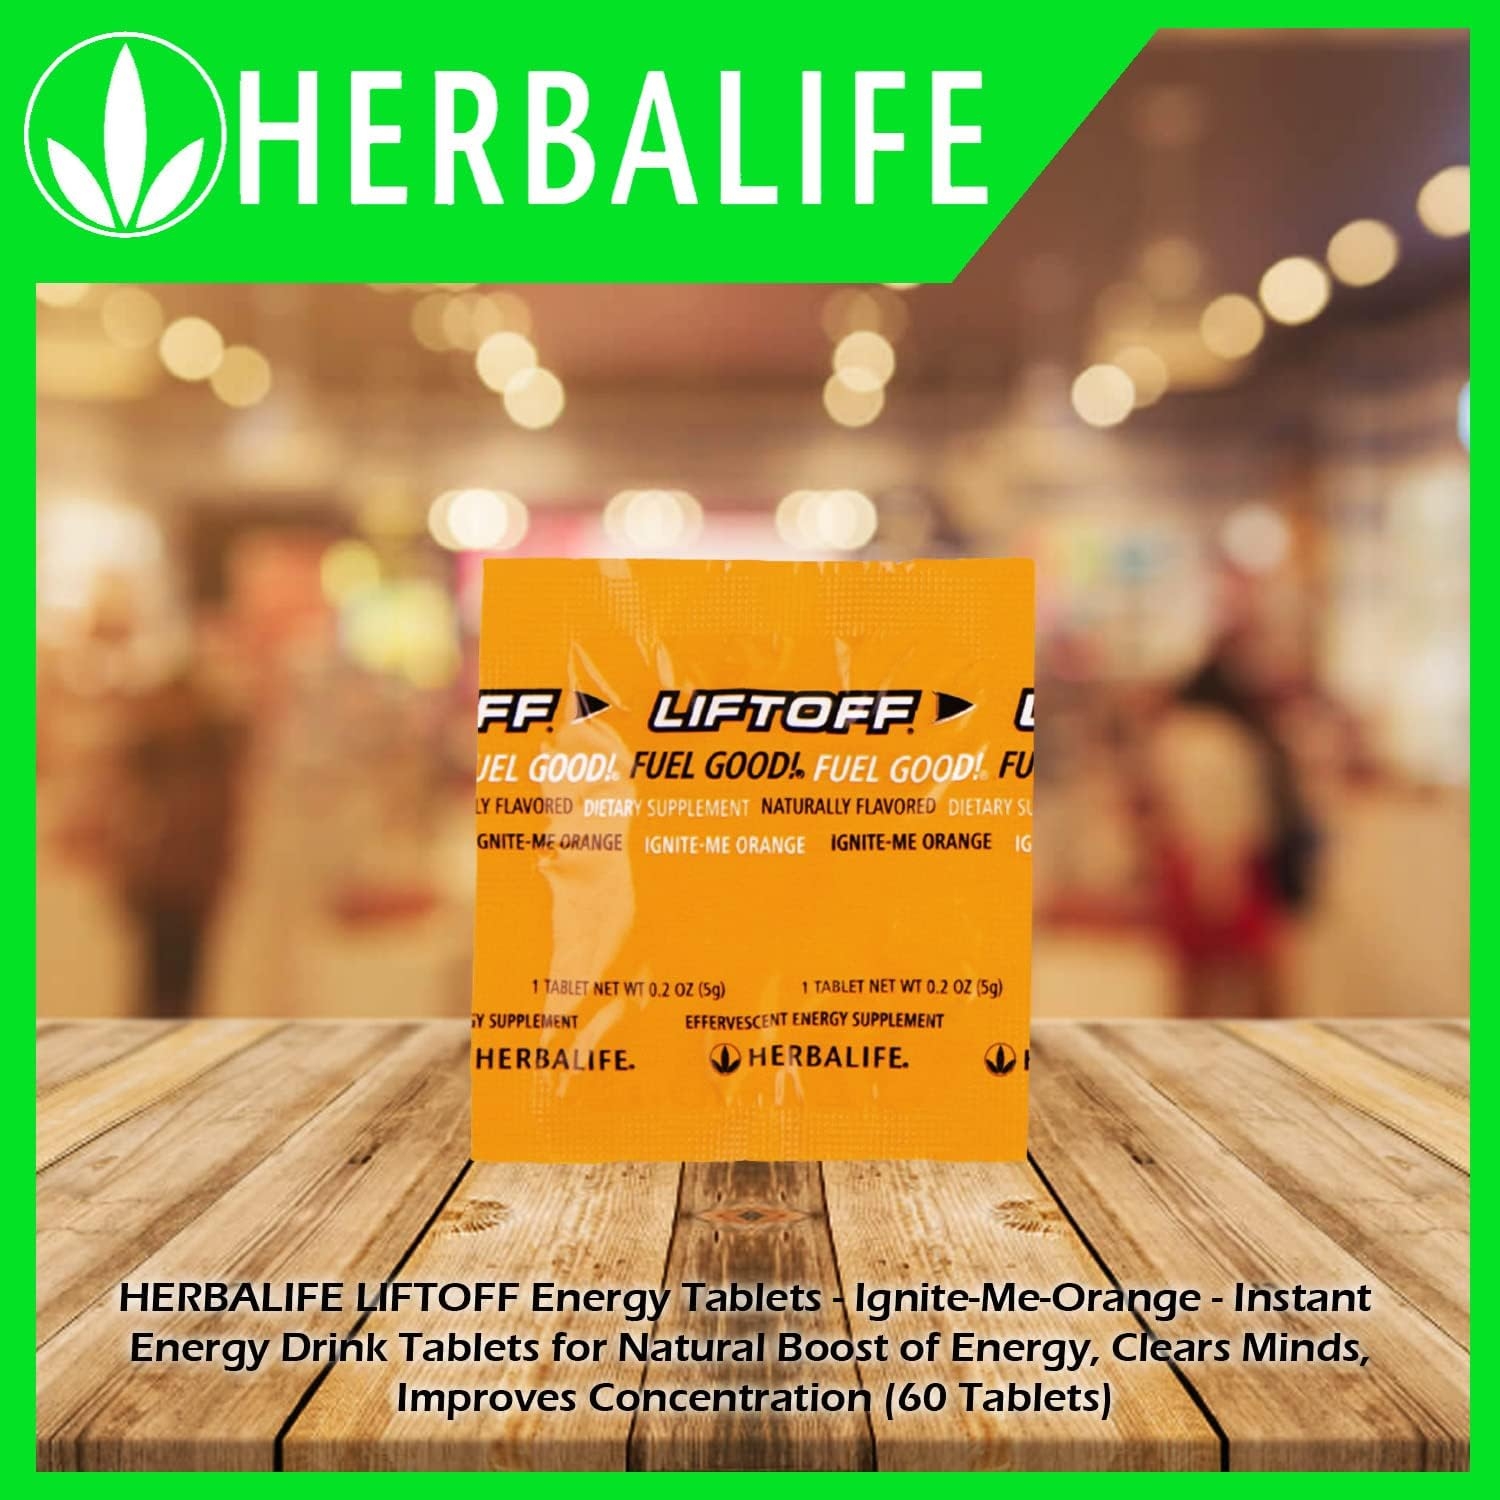 Herbalife HERBALIFE LIFTOFF Energy Tablets - Ignite-Me-Orange - Instant Energy Drink Tablets for Natural Boost of Energy, Clears Minds, Improves Concentration (60 Tablets) 60 Count (Pack of 1)